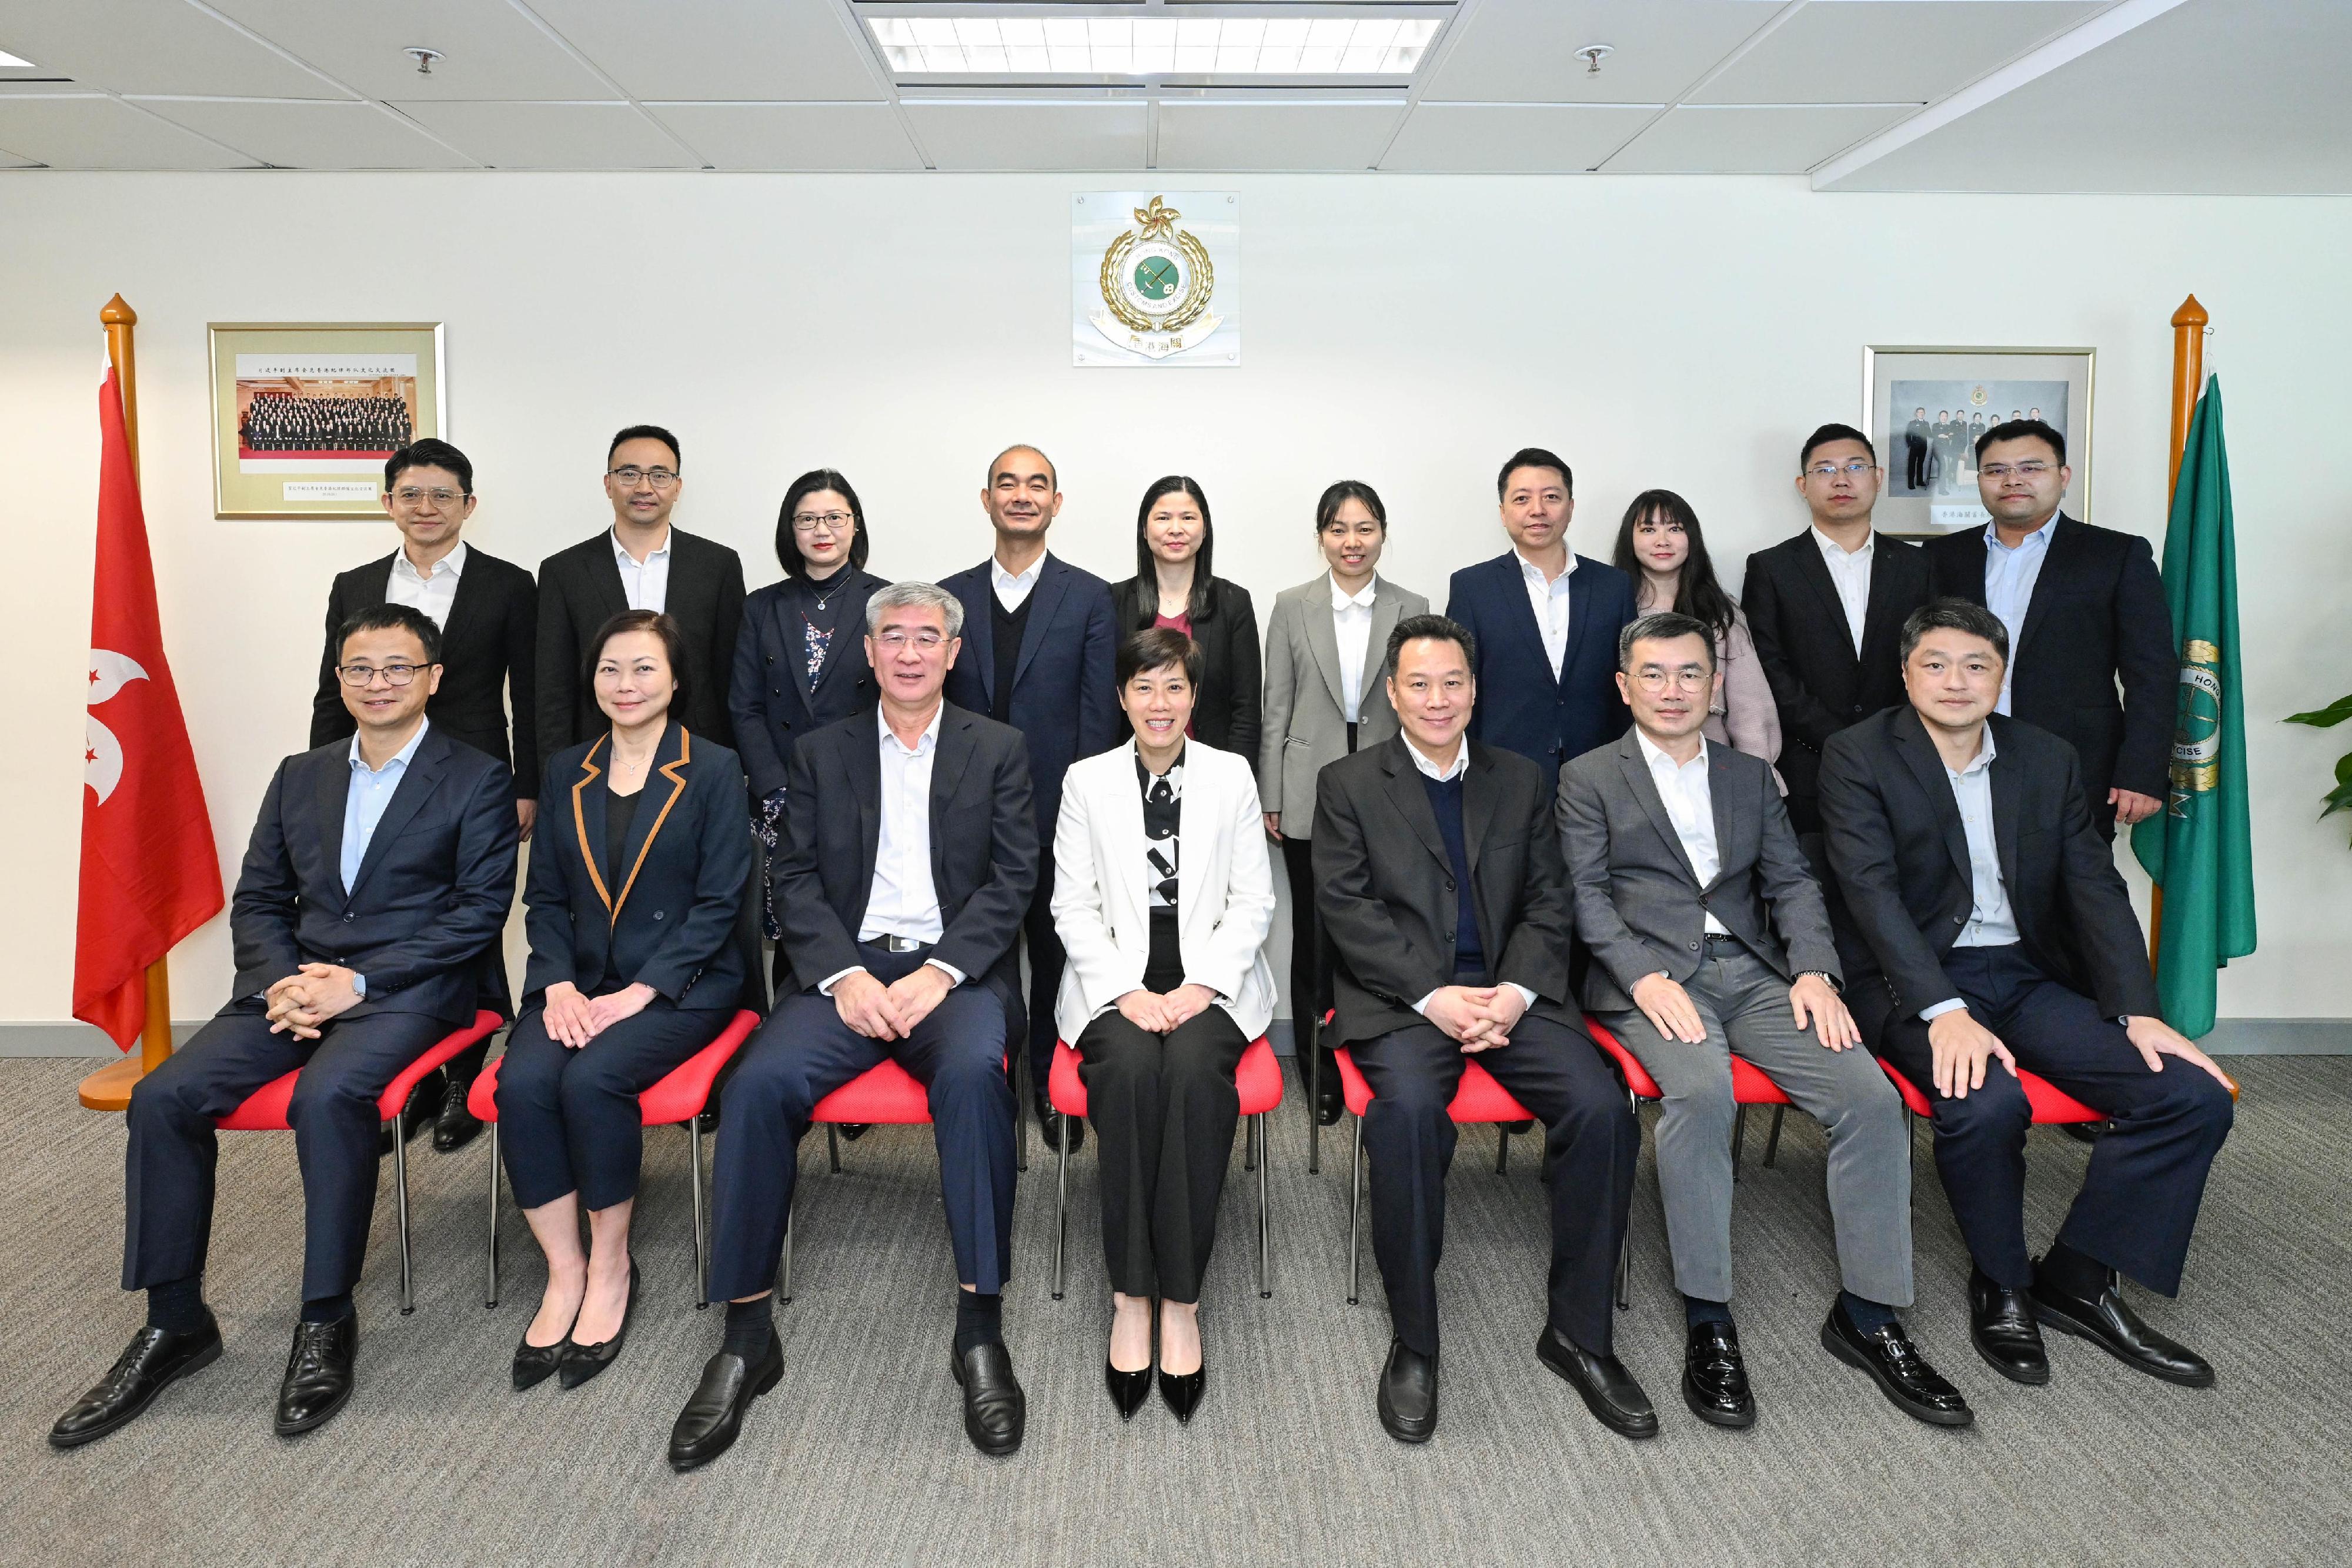 The Commissioner of Customs and Excise, Ms Louise Ho, today (March 13) met the Chief of the Office of Port of Entry and Exit of the Shenzhen Municipal People's Government, Mr Wang Gang, in the Customs Headquarters Building. Photo shows Ms Ho (front row, centre), Mr Wang (front row, third left) and members of the delegation.